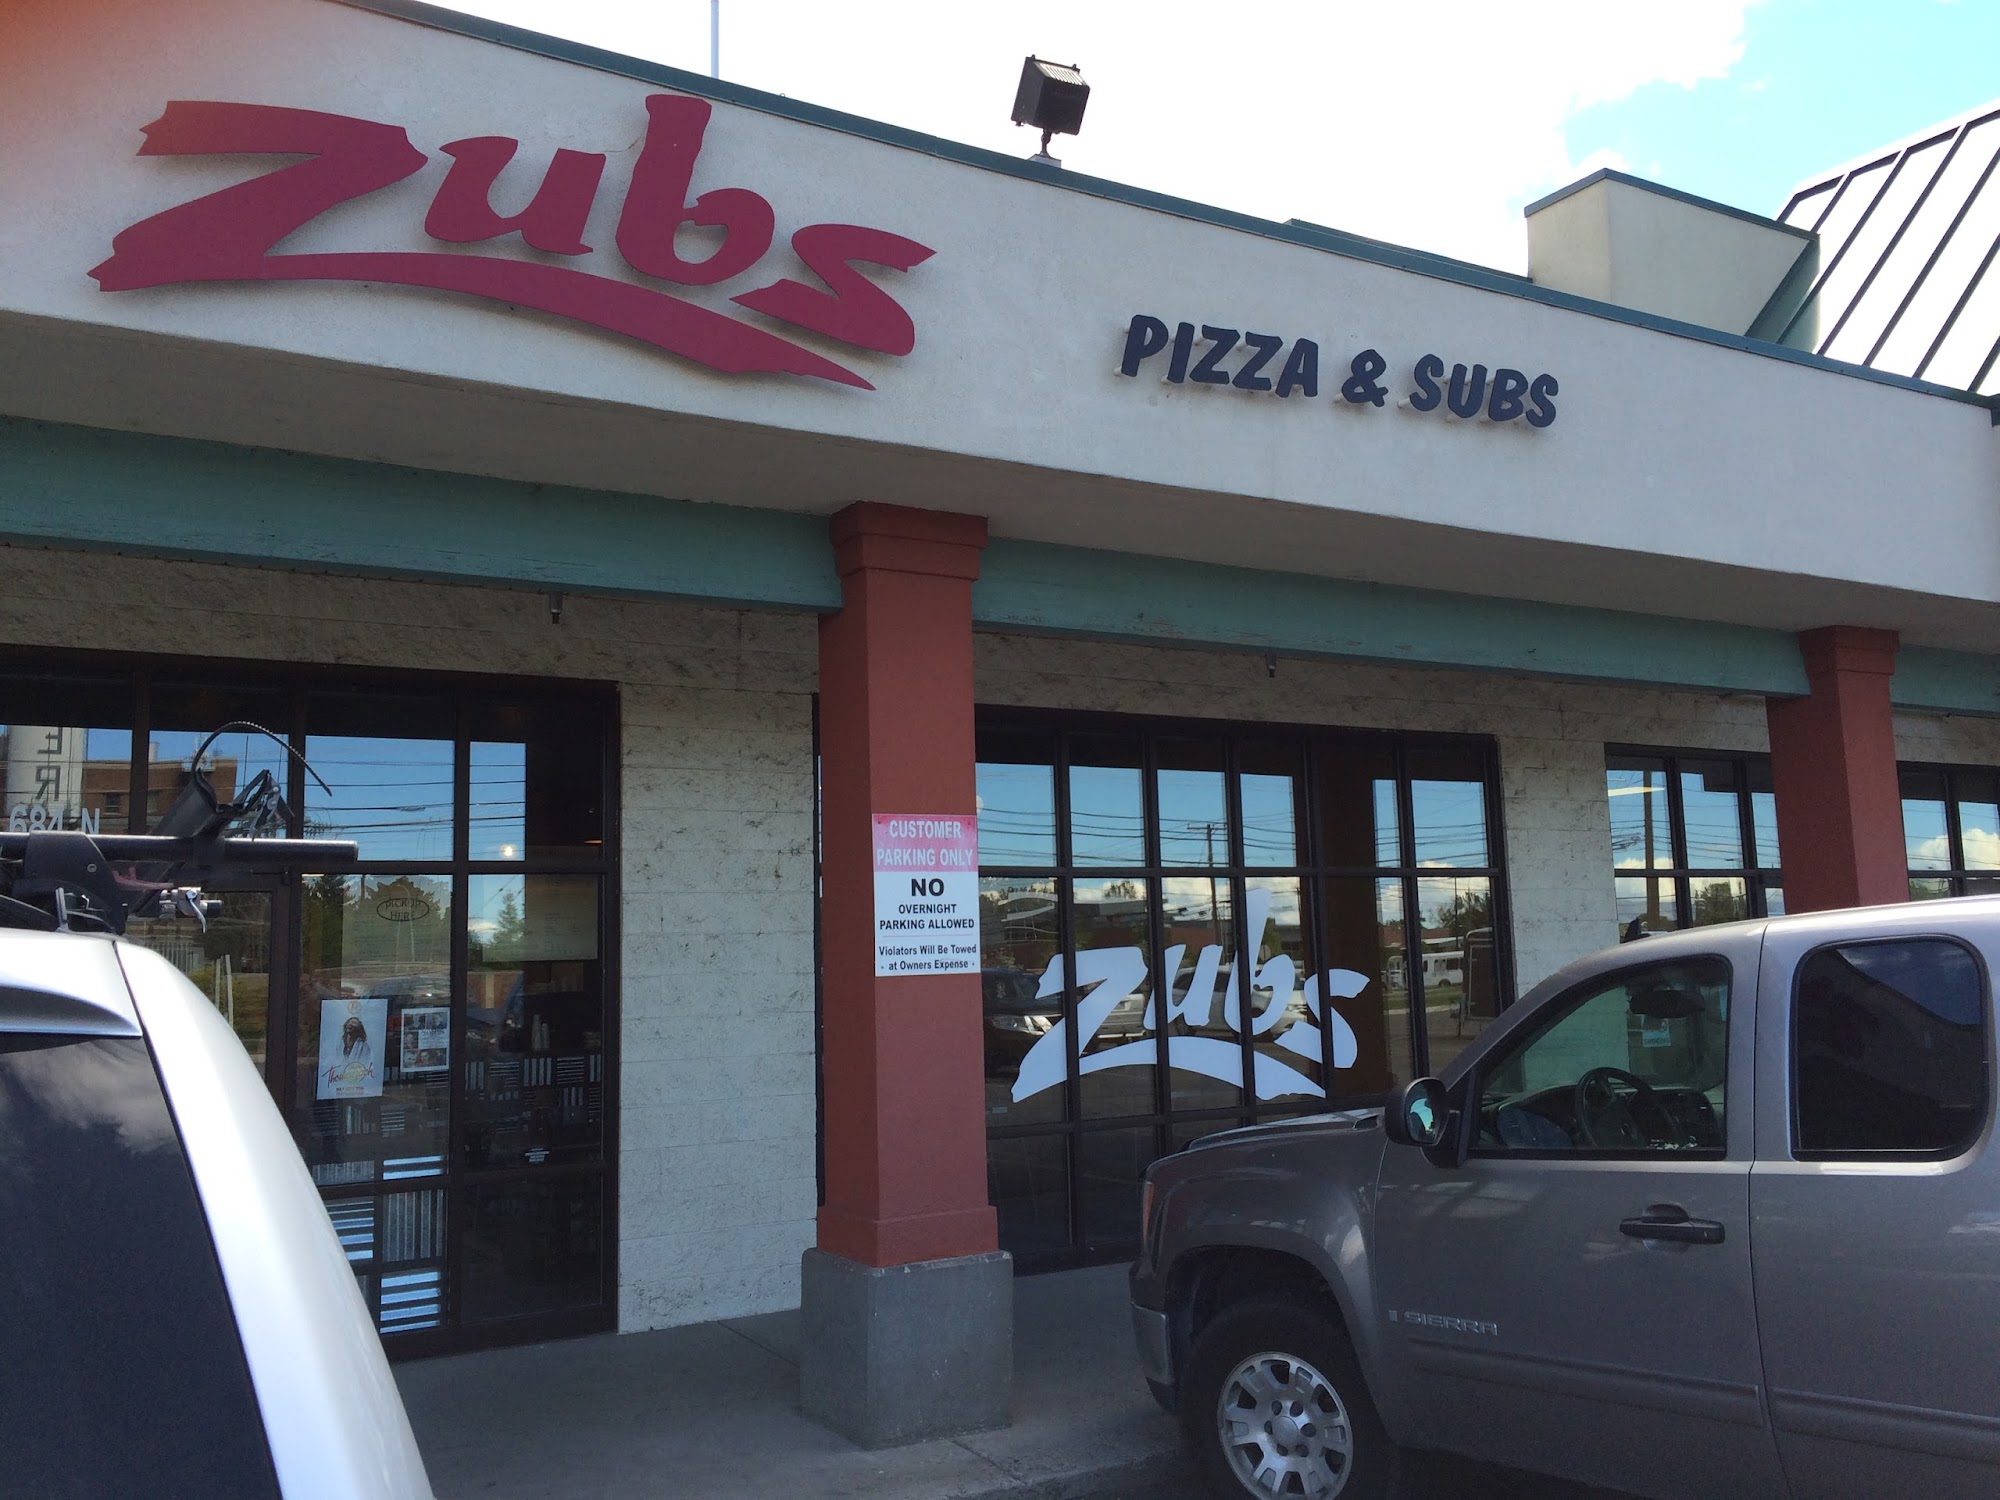 Zubs Pizza & Subs